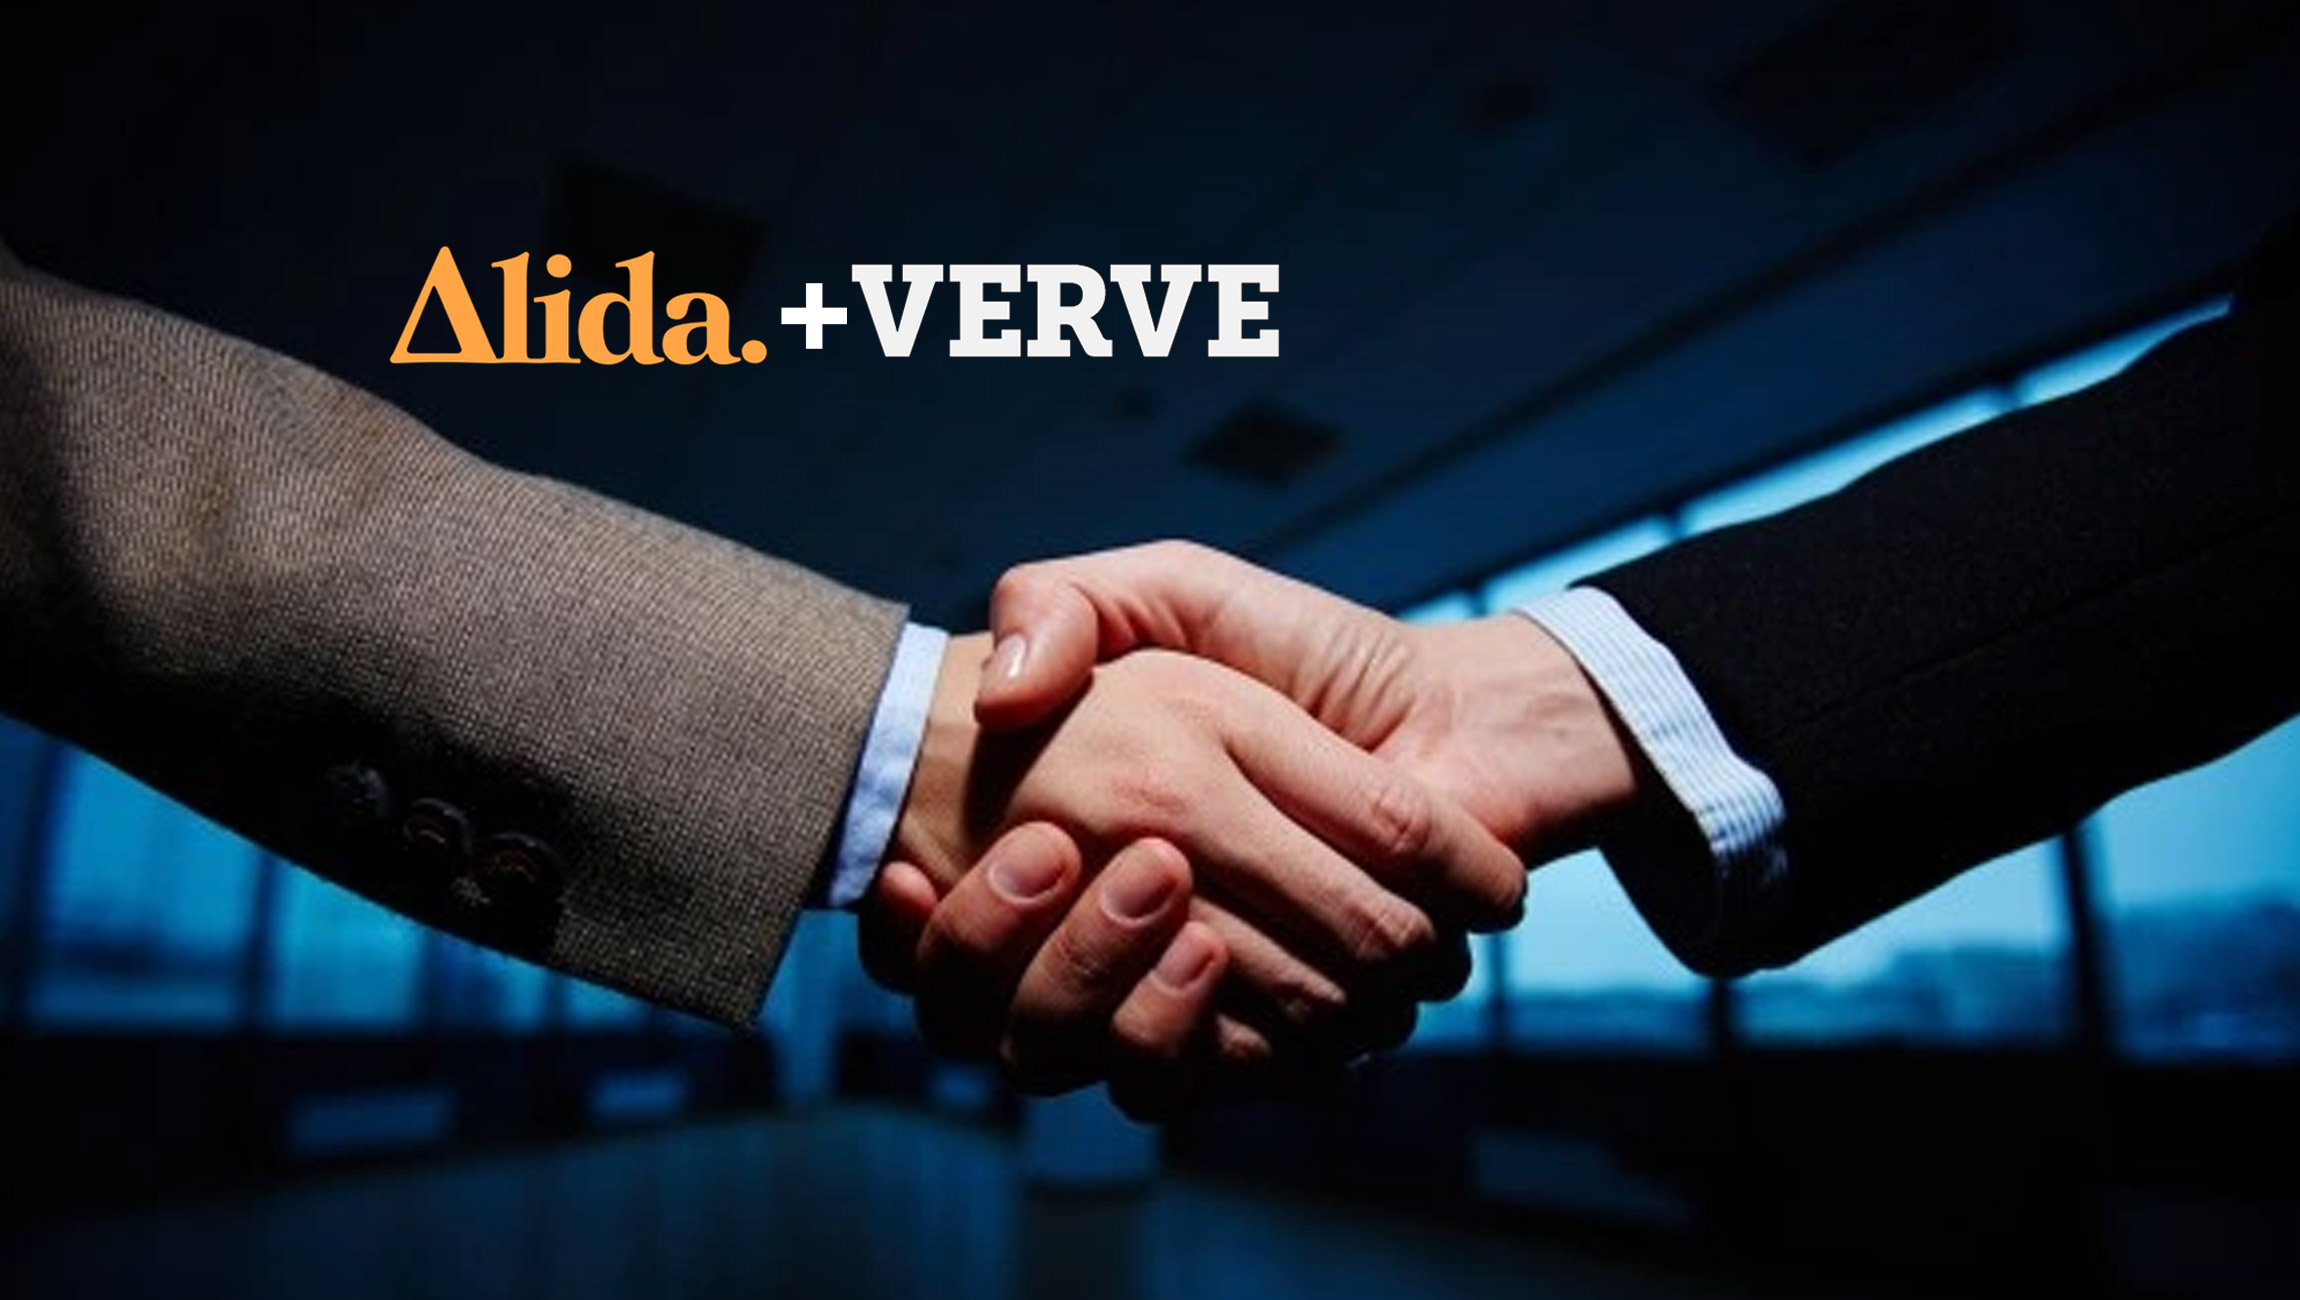 Verve-and-Alida-Partner-Together-to-Transform-Customer-Experiences